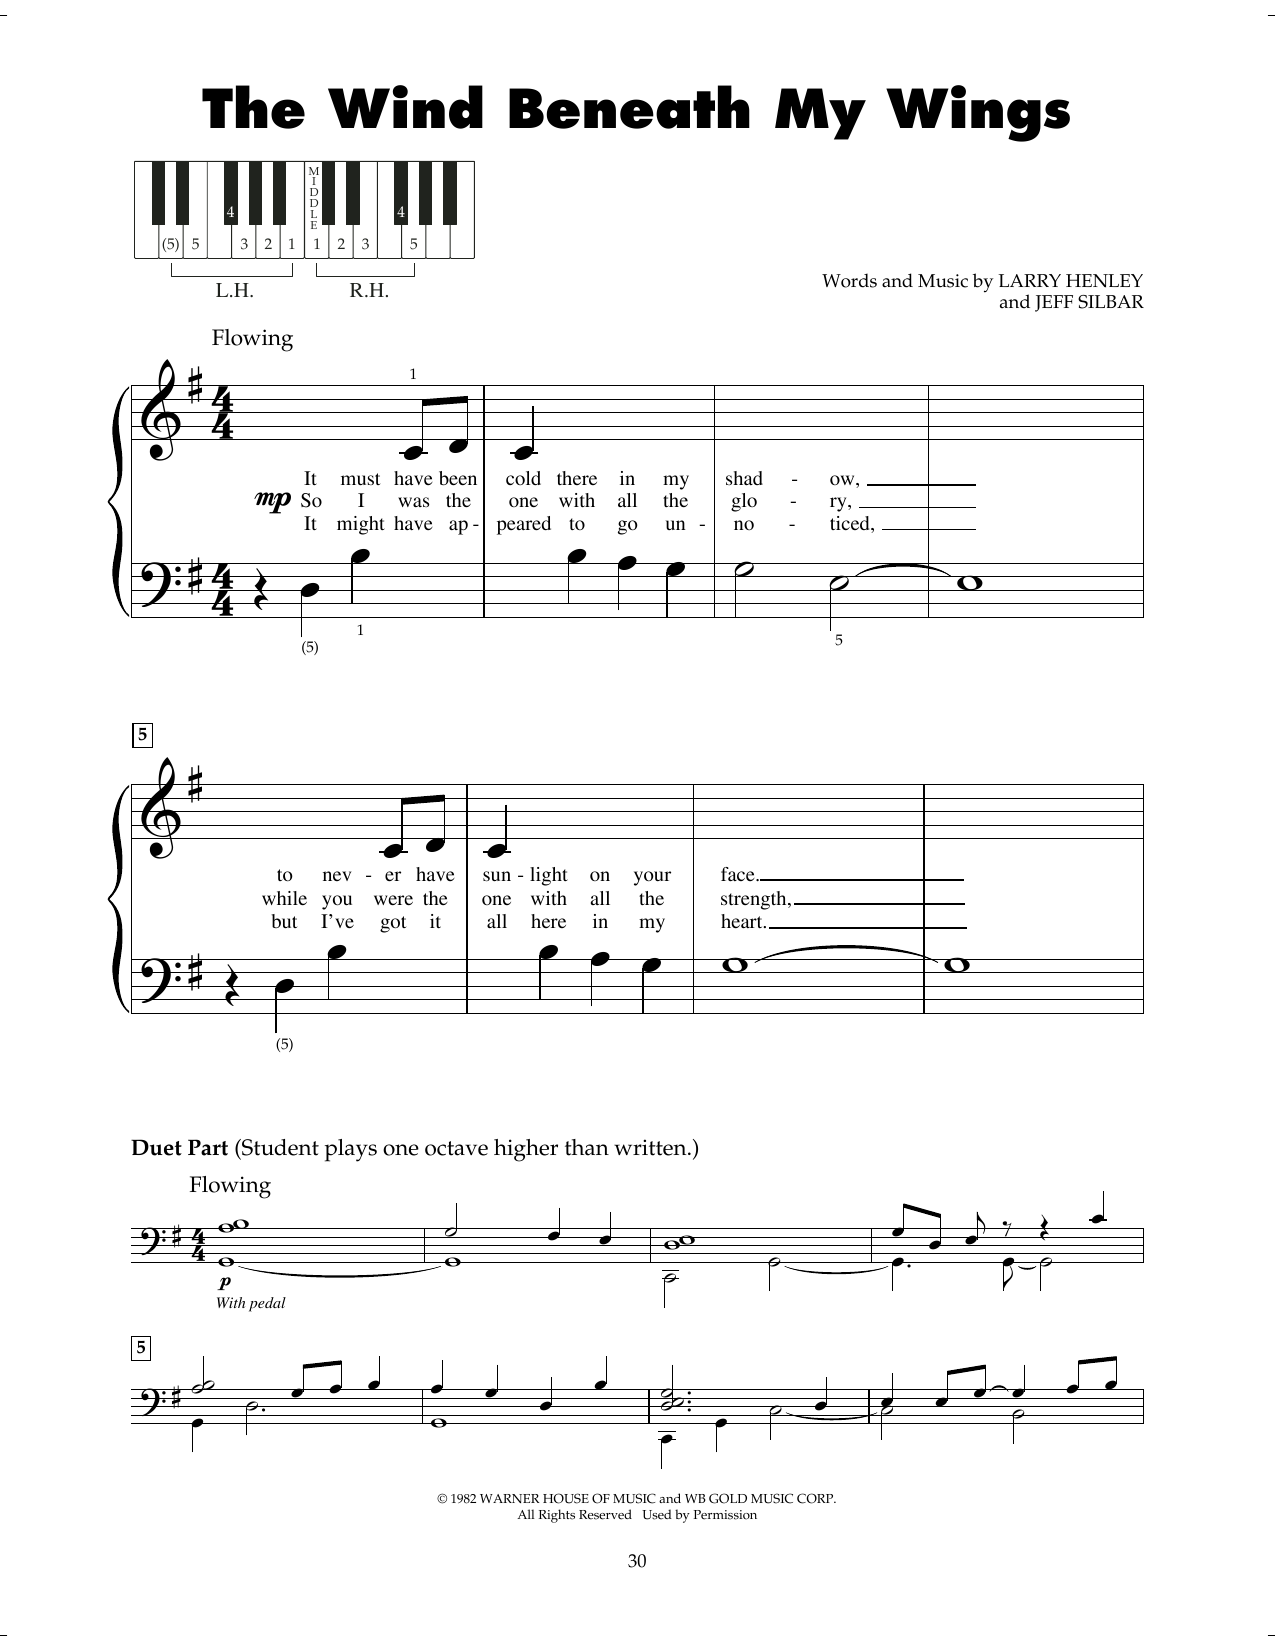 Bette Midler The Wind Beneath My Wings sheet music notes printable PDF score